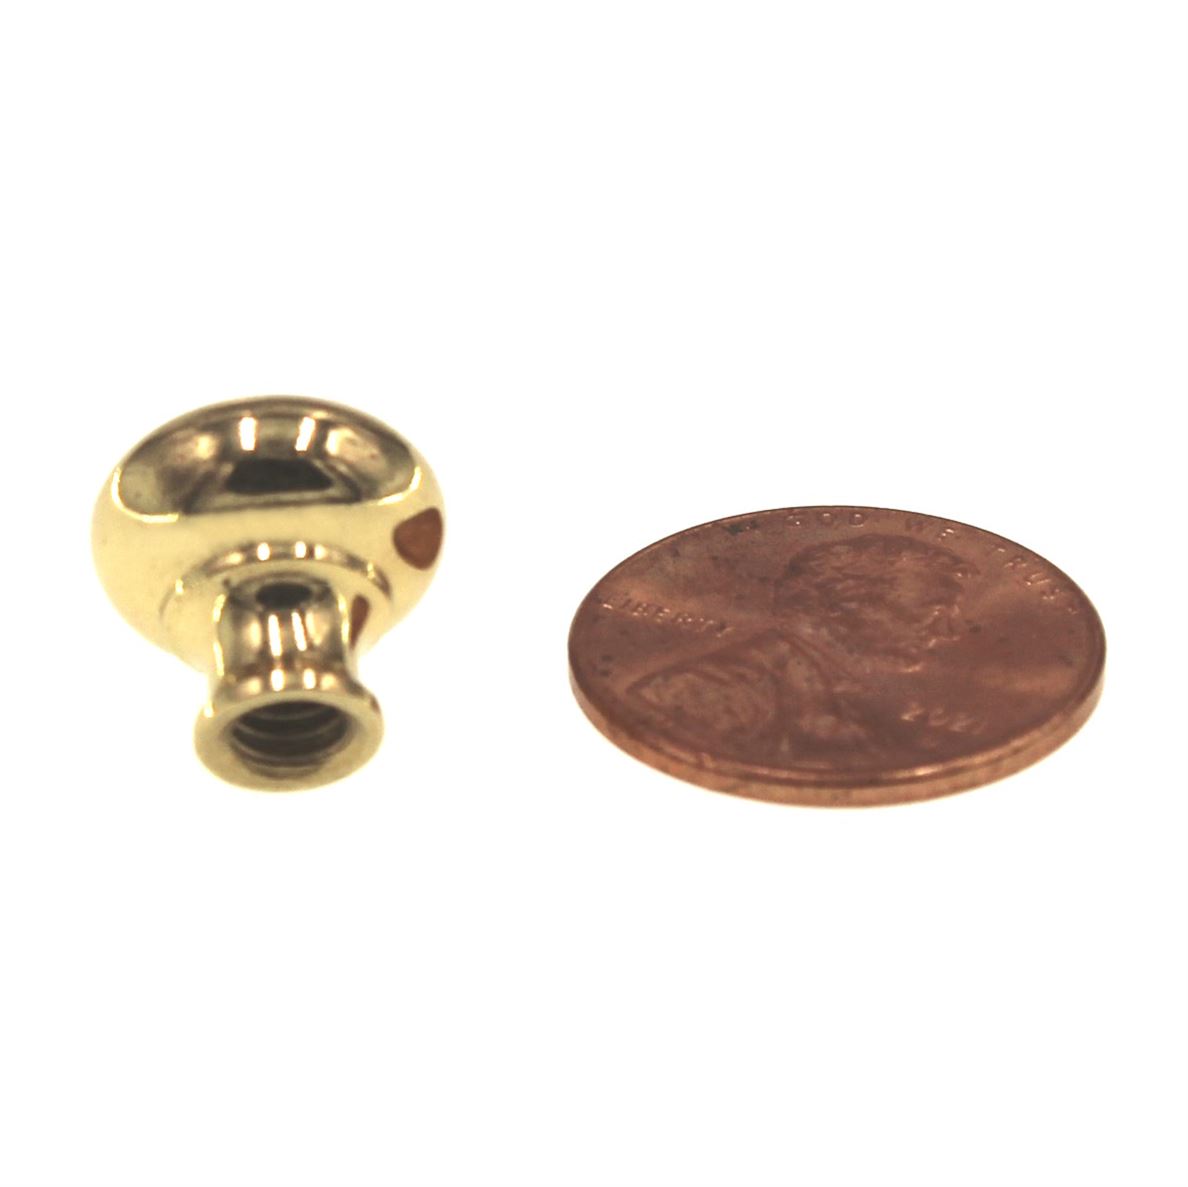 Hickory Hardware Solid Brass Polished Brass 1/2" Extra Small Cabinet Knob BK9-03